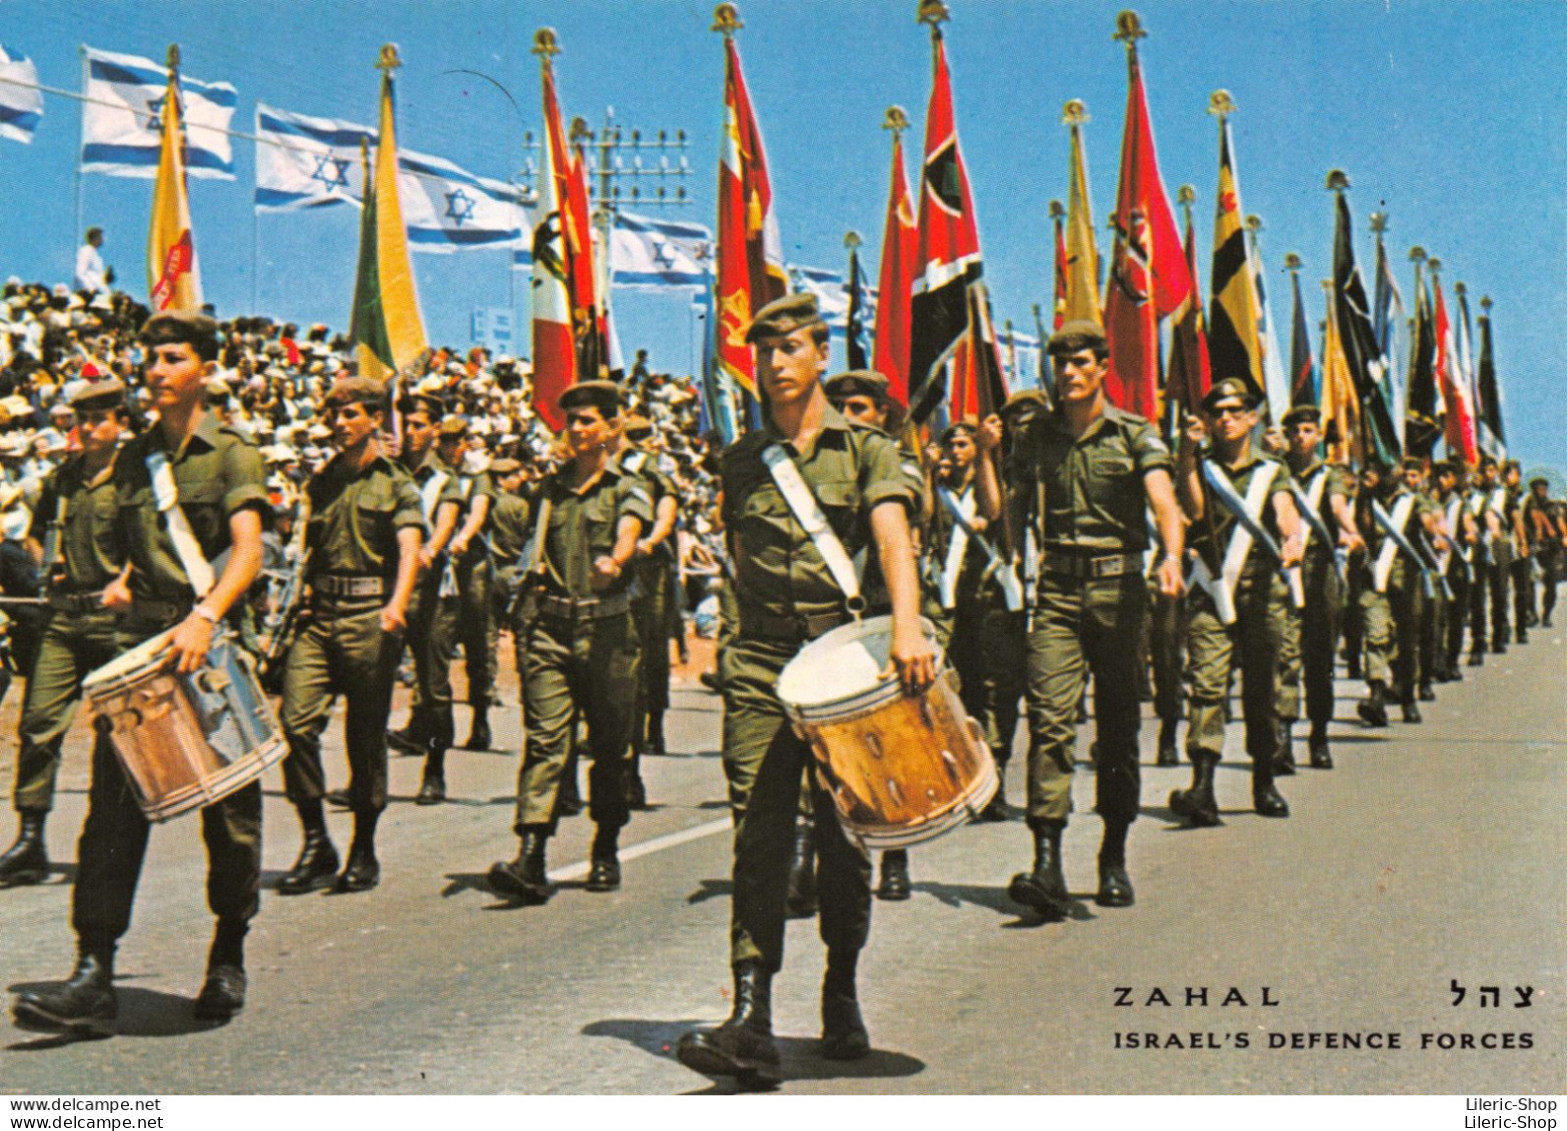 ZAHAL ISRAEL DEFENCE FORCES ZAHAL FLAGS ON INDEPENDENCE DAY PARADE - Jewish Judaica Cpm - Israel